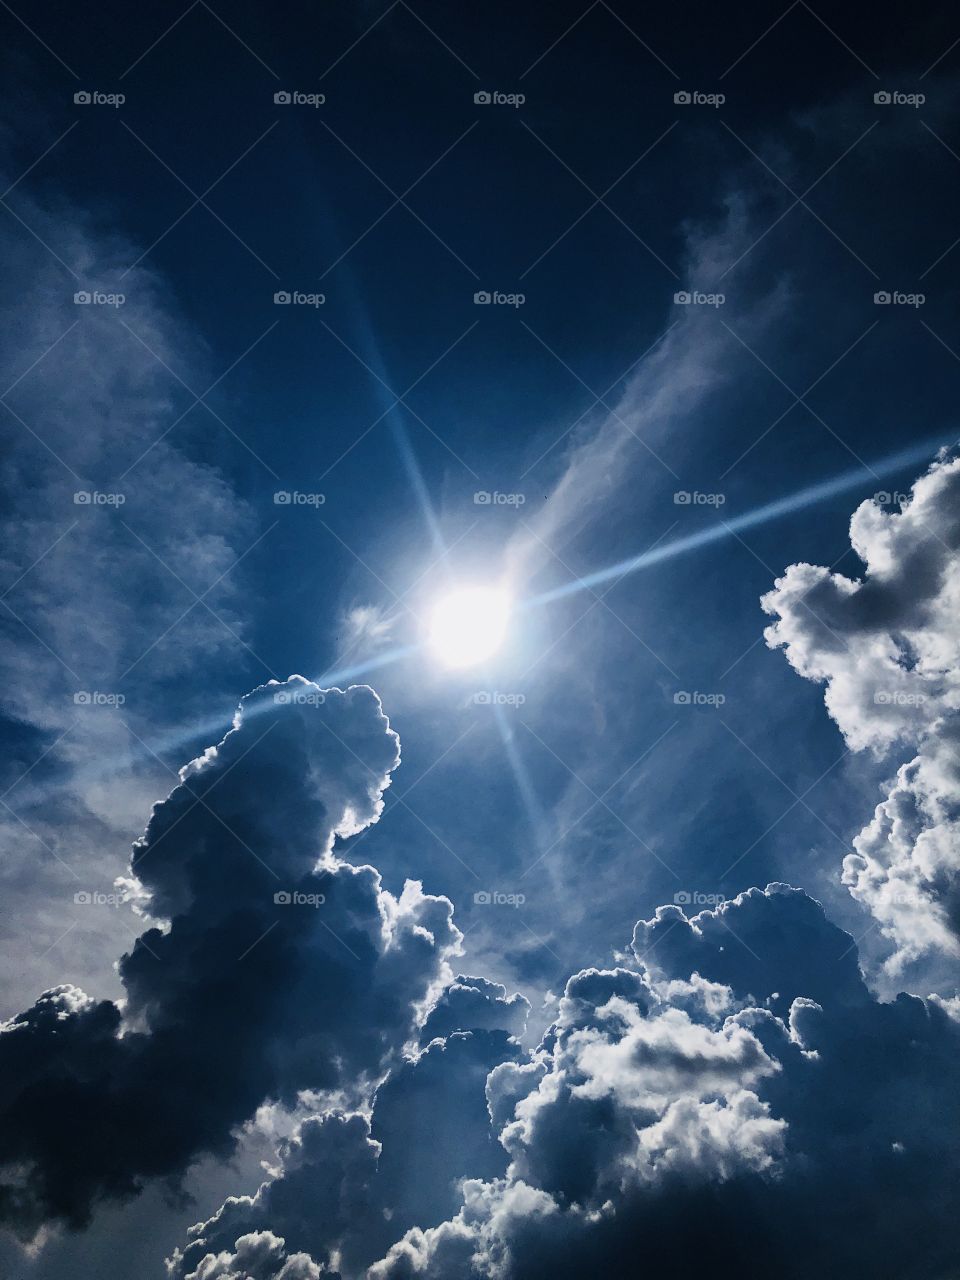 Majestic view of some cloud formations, lens flare with shadows and dramatic highlights.